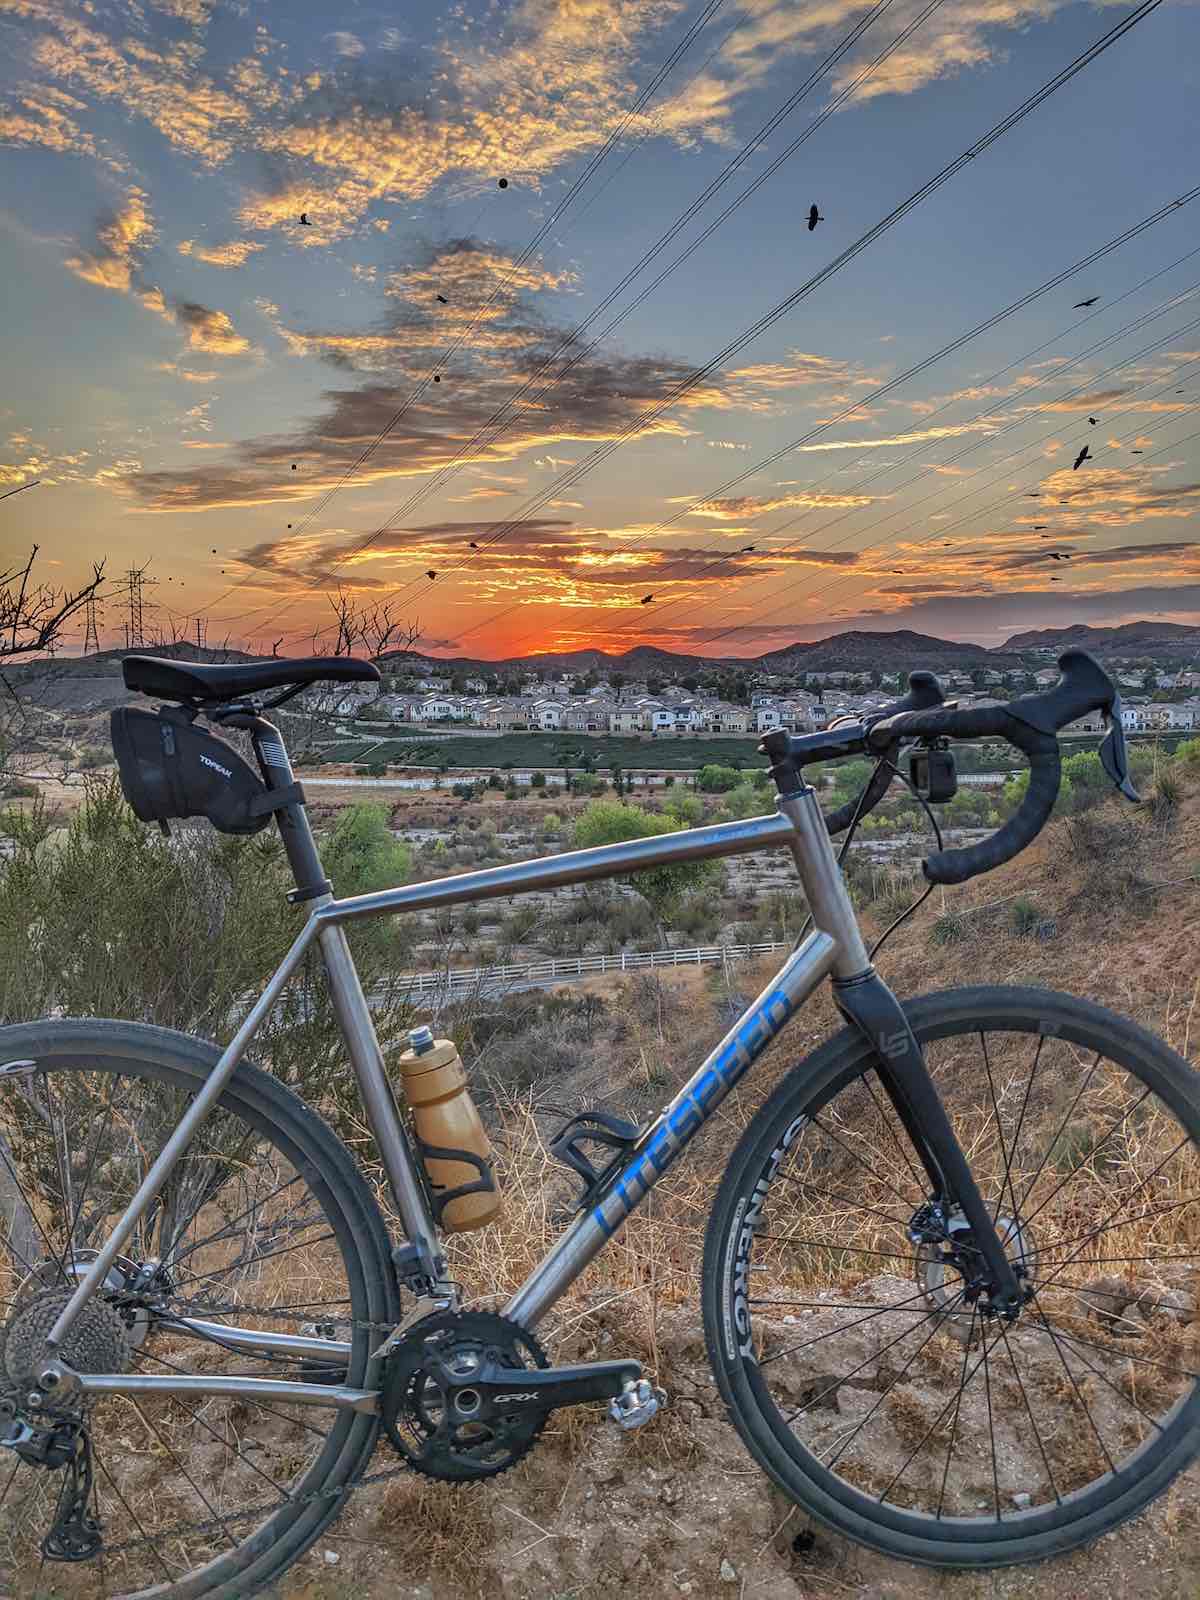 bikerumor pic of the day a titanium bicycle is in the foreground before a desert like field with a city filled with homes in the distance at dusk with the sun just below the horizon.